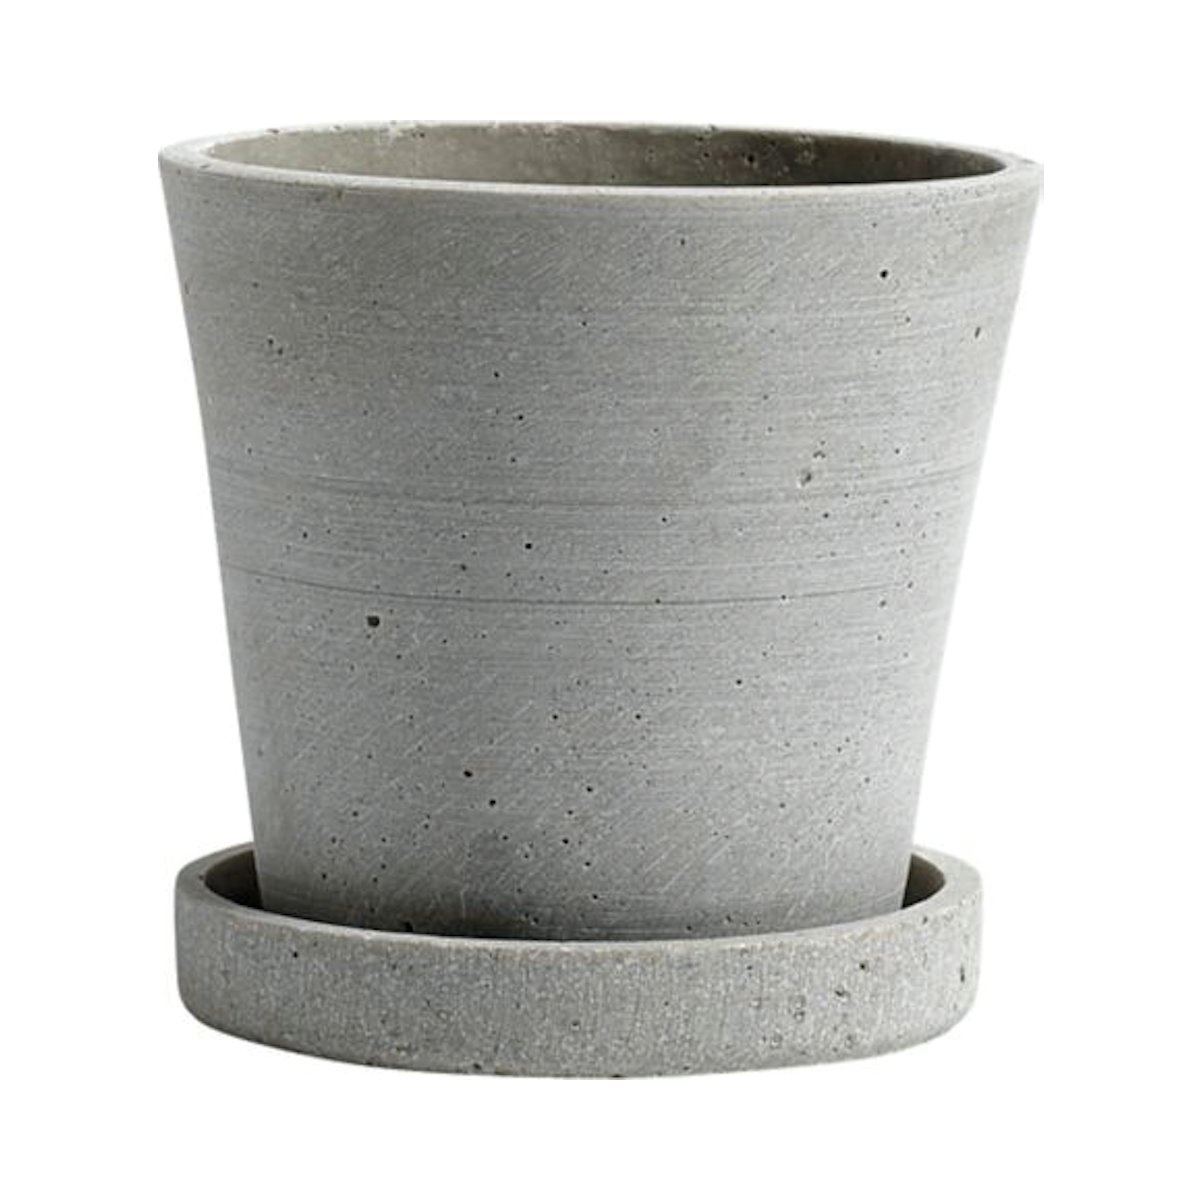 Flowerpot with Saucer - with drainage